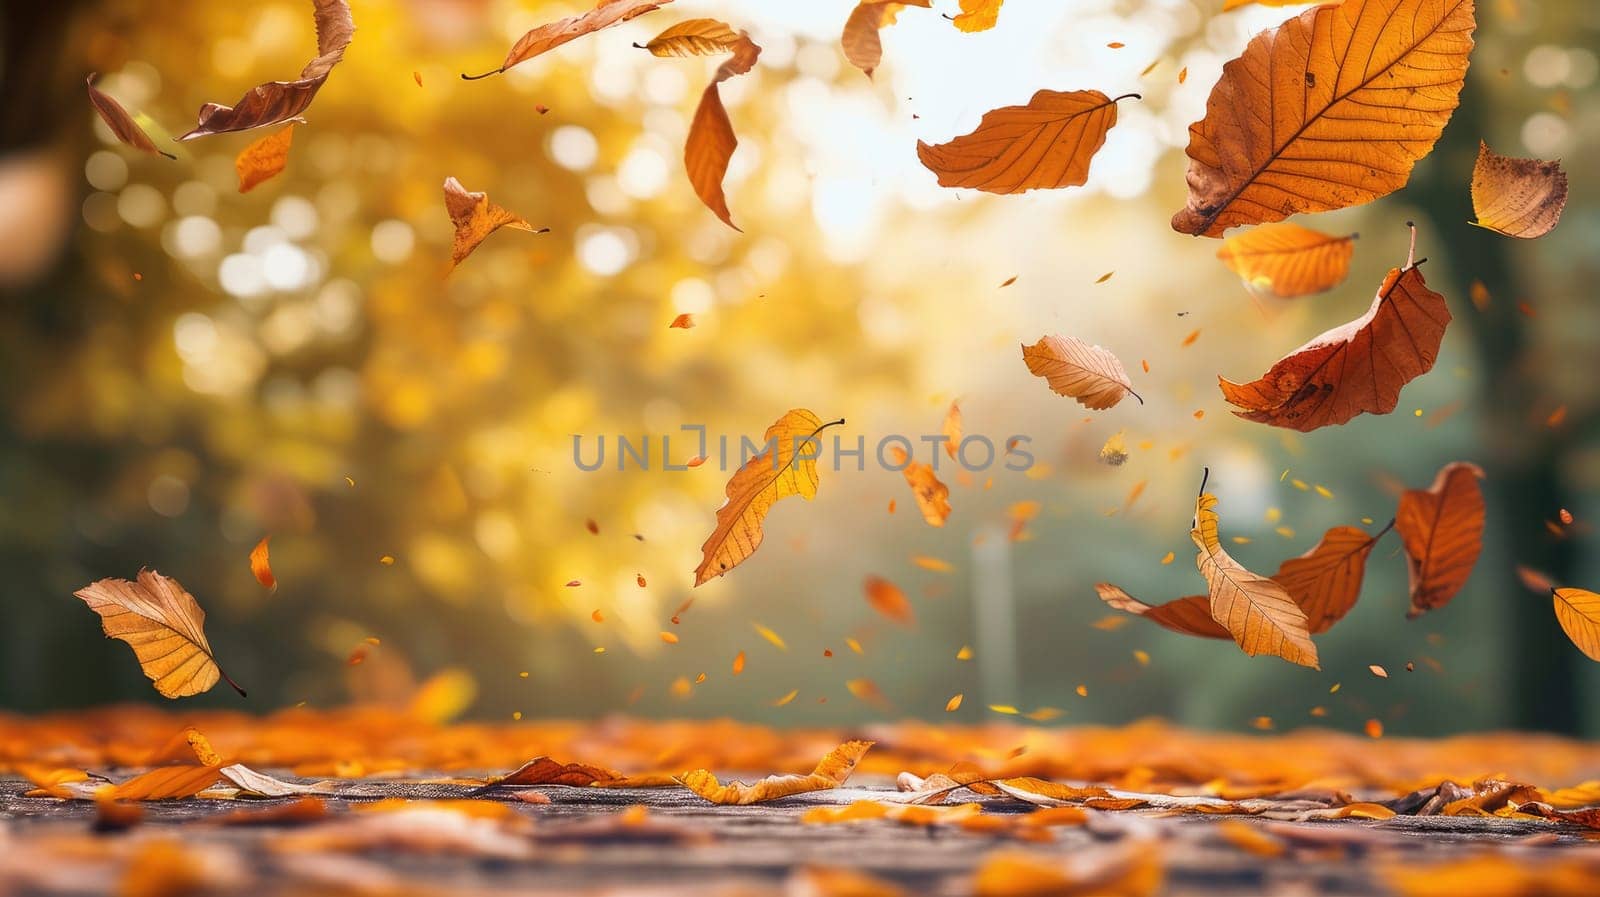 The autumn park is strewn with yellow leaves, creating a colorful palette of autumn colors.